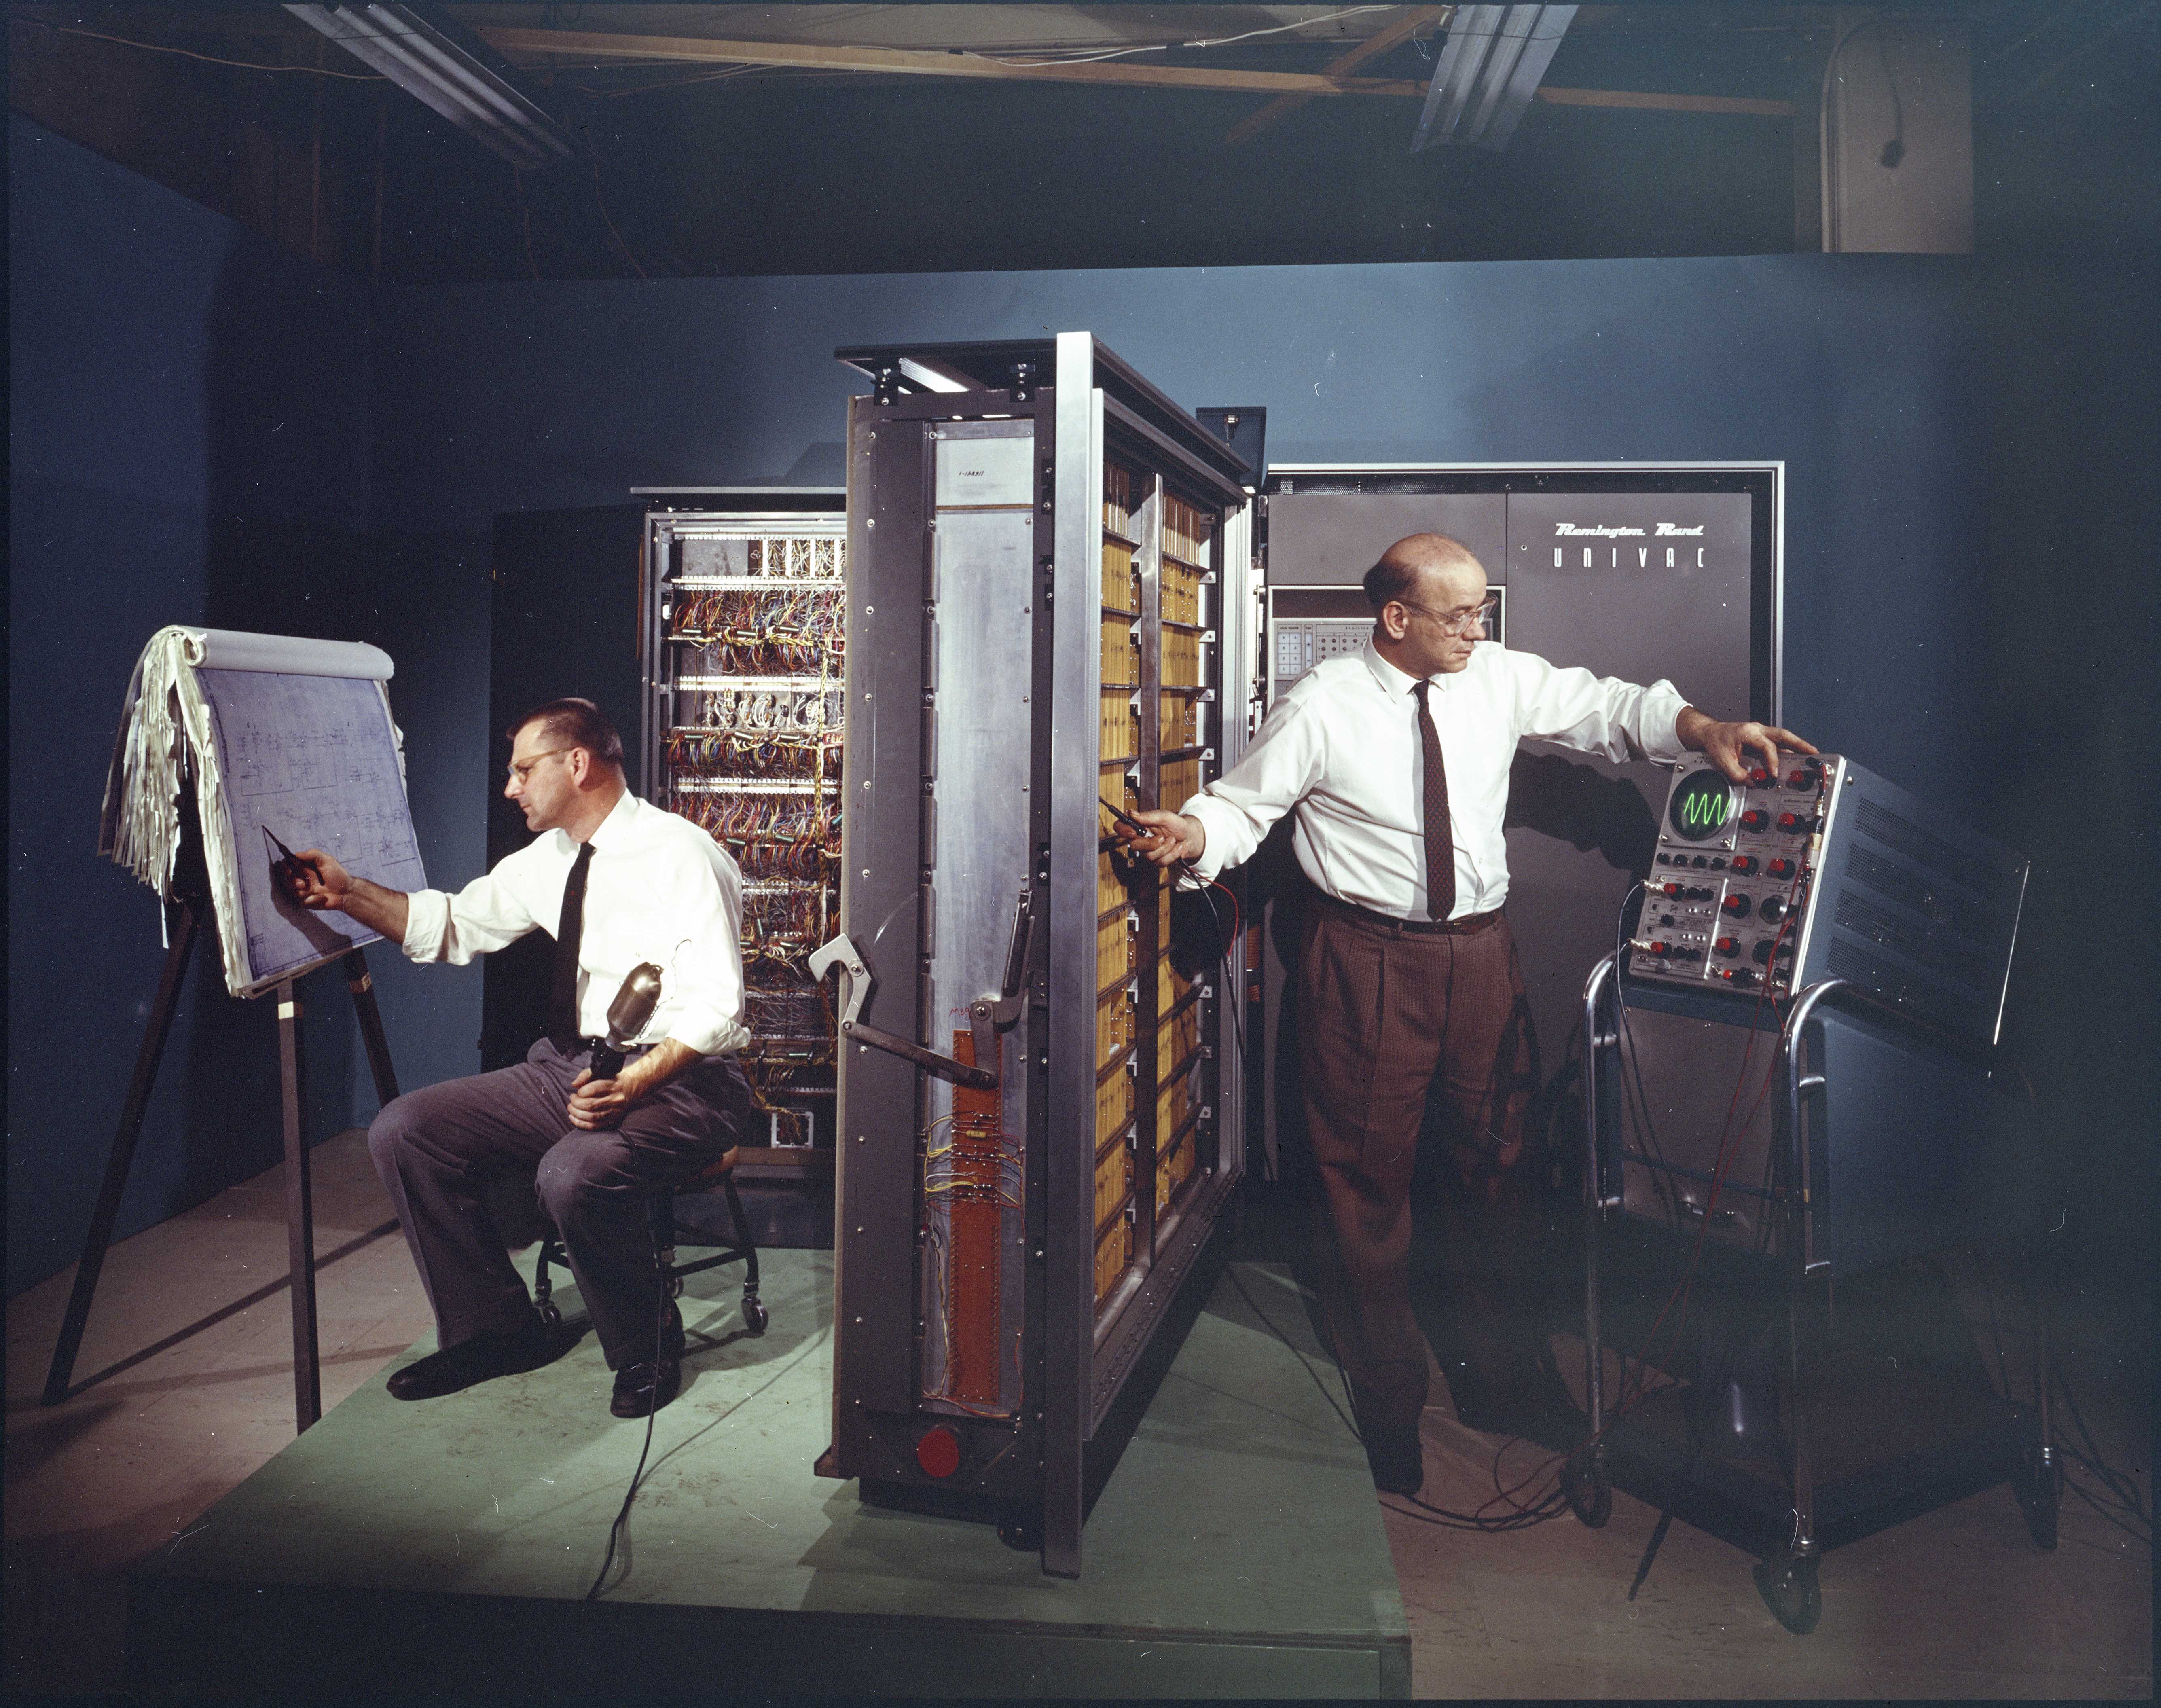 Color image of two men installing a large UNIVAC computer